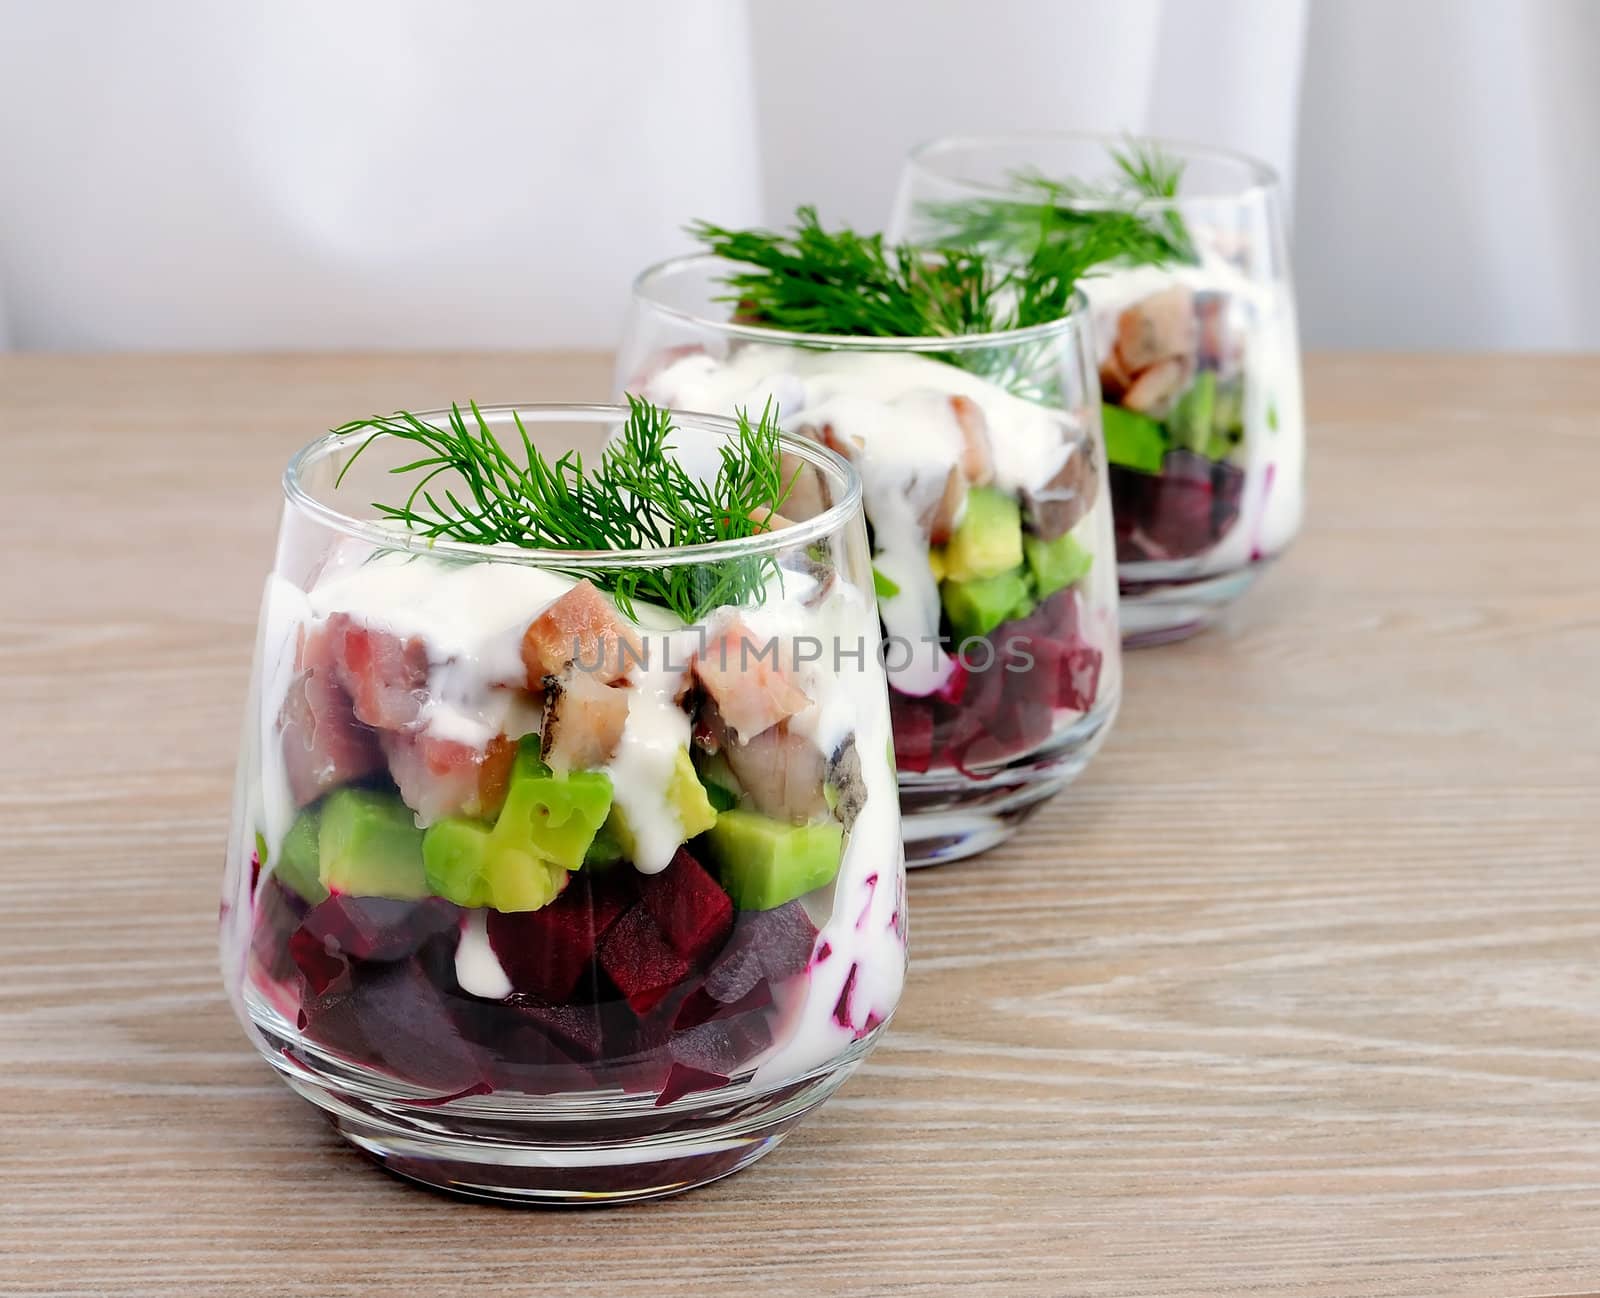 Beetroot salad with avocado and herring in cream sauce in a glass